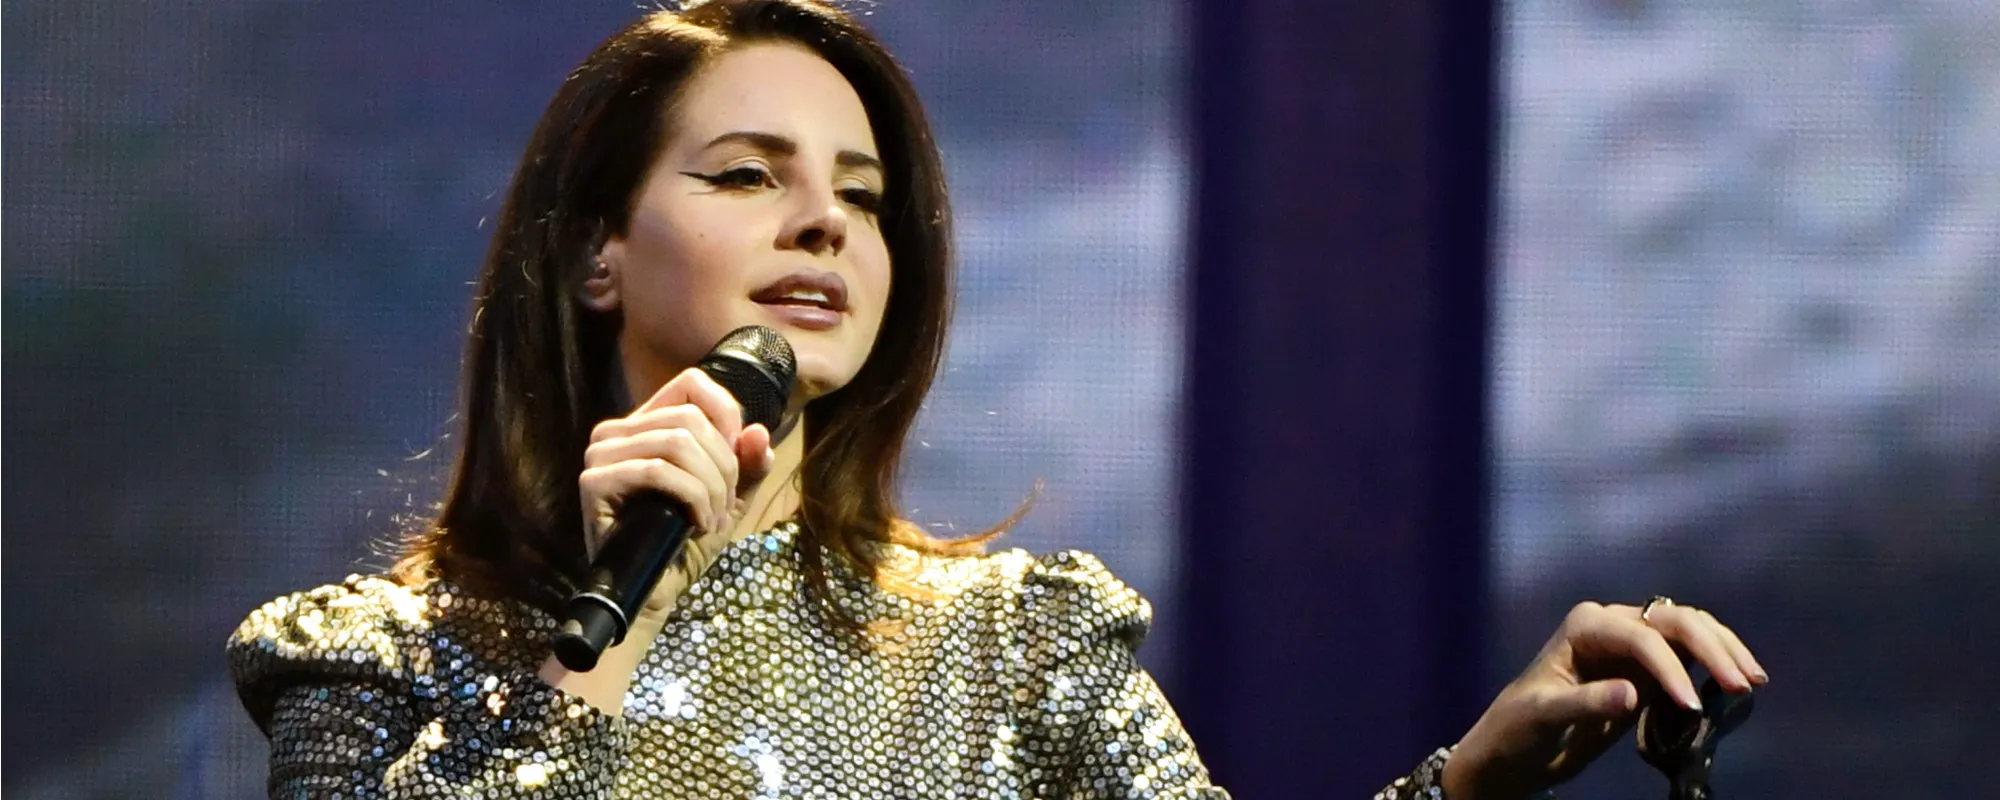 Lana Del Rey Reveals She’s Working With Taylor Swift’s Go-to Producer on New Music